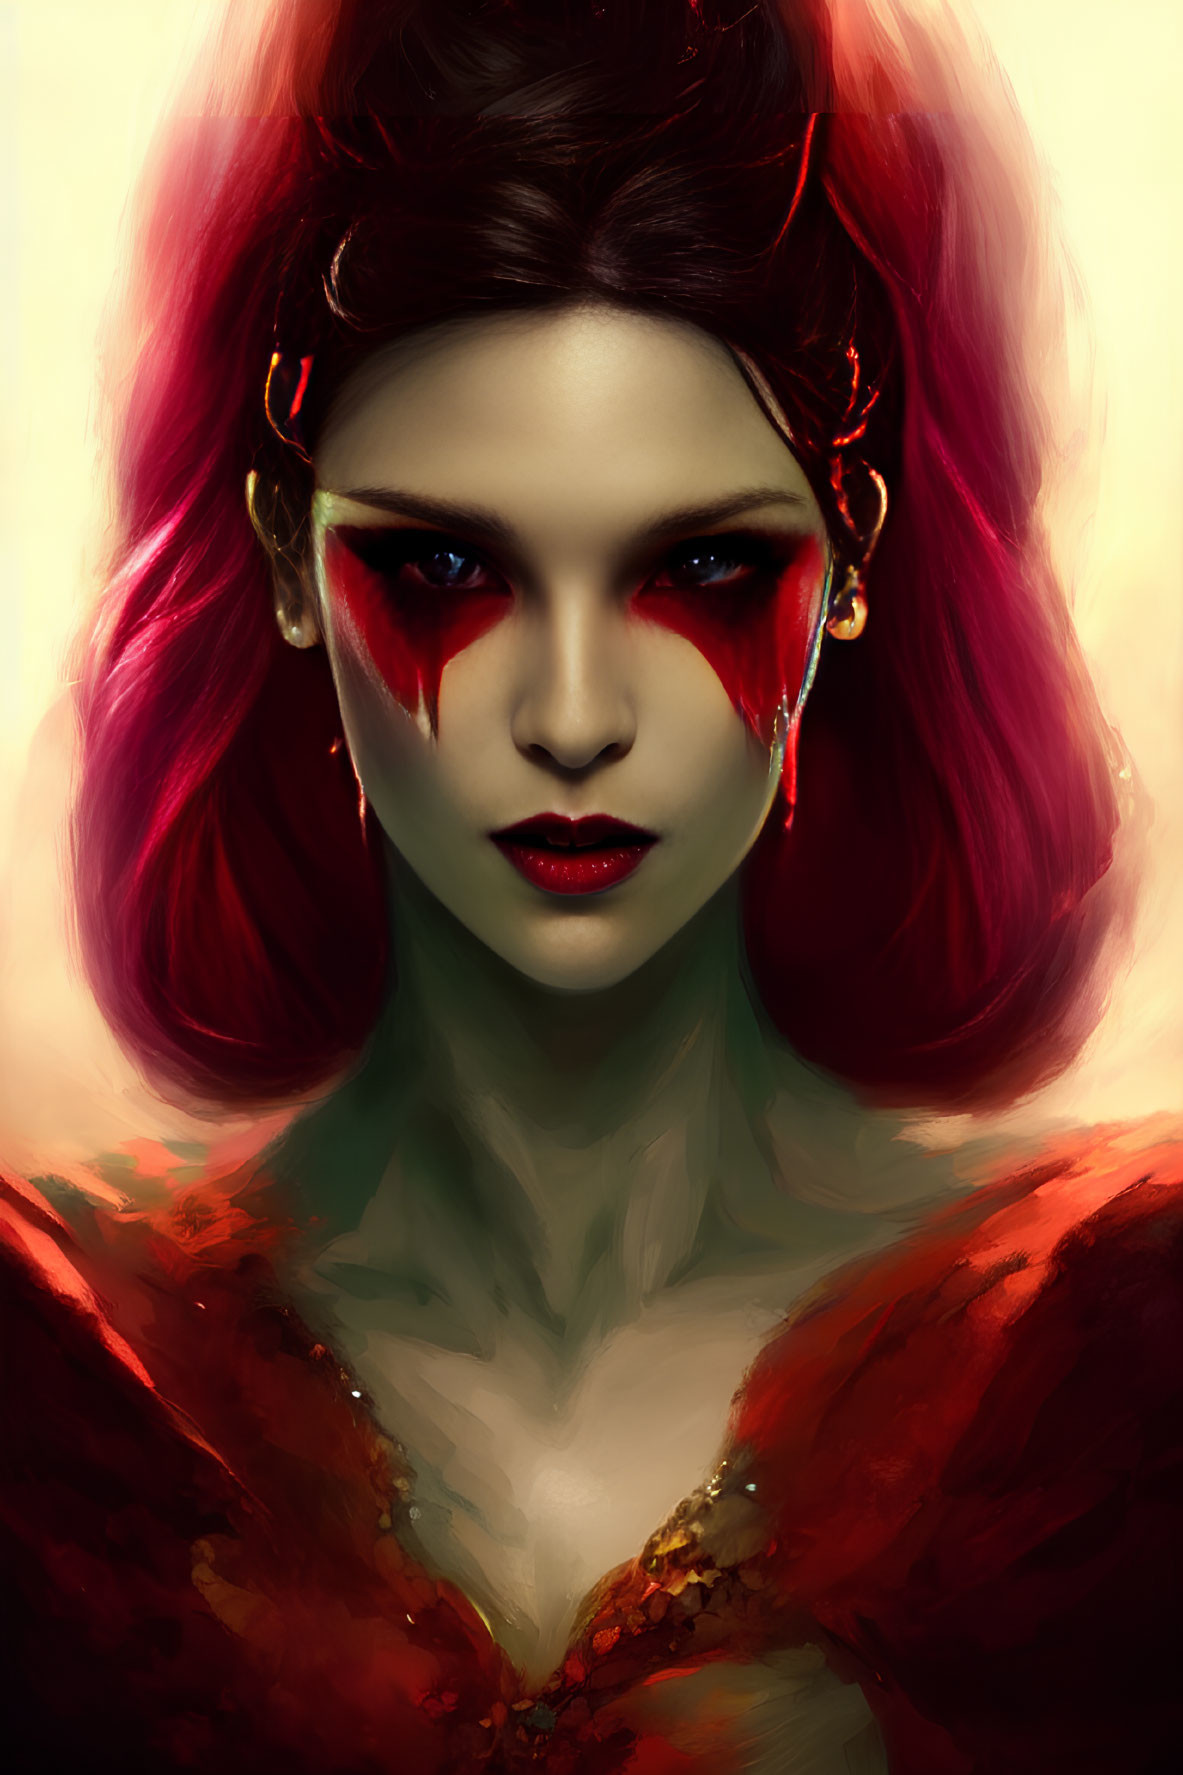 Digital artwork: Woman with red and pink hair, crimson tears, red eyes, ornate attire